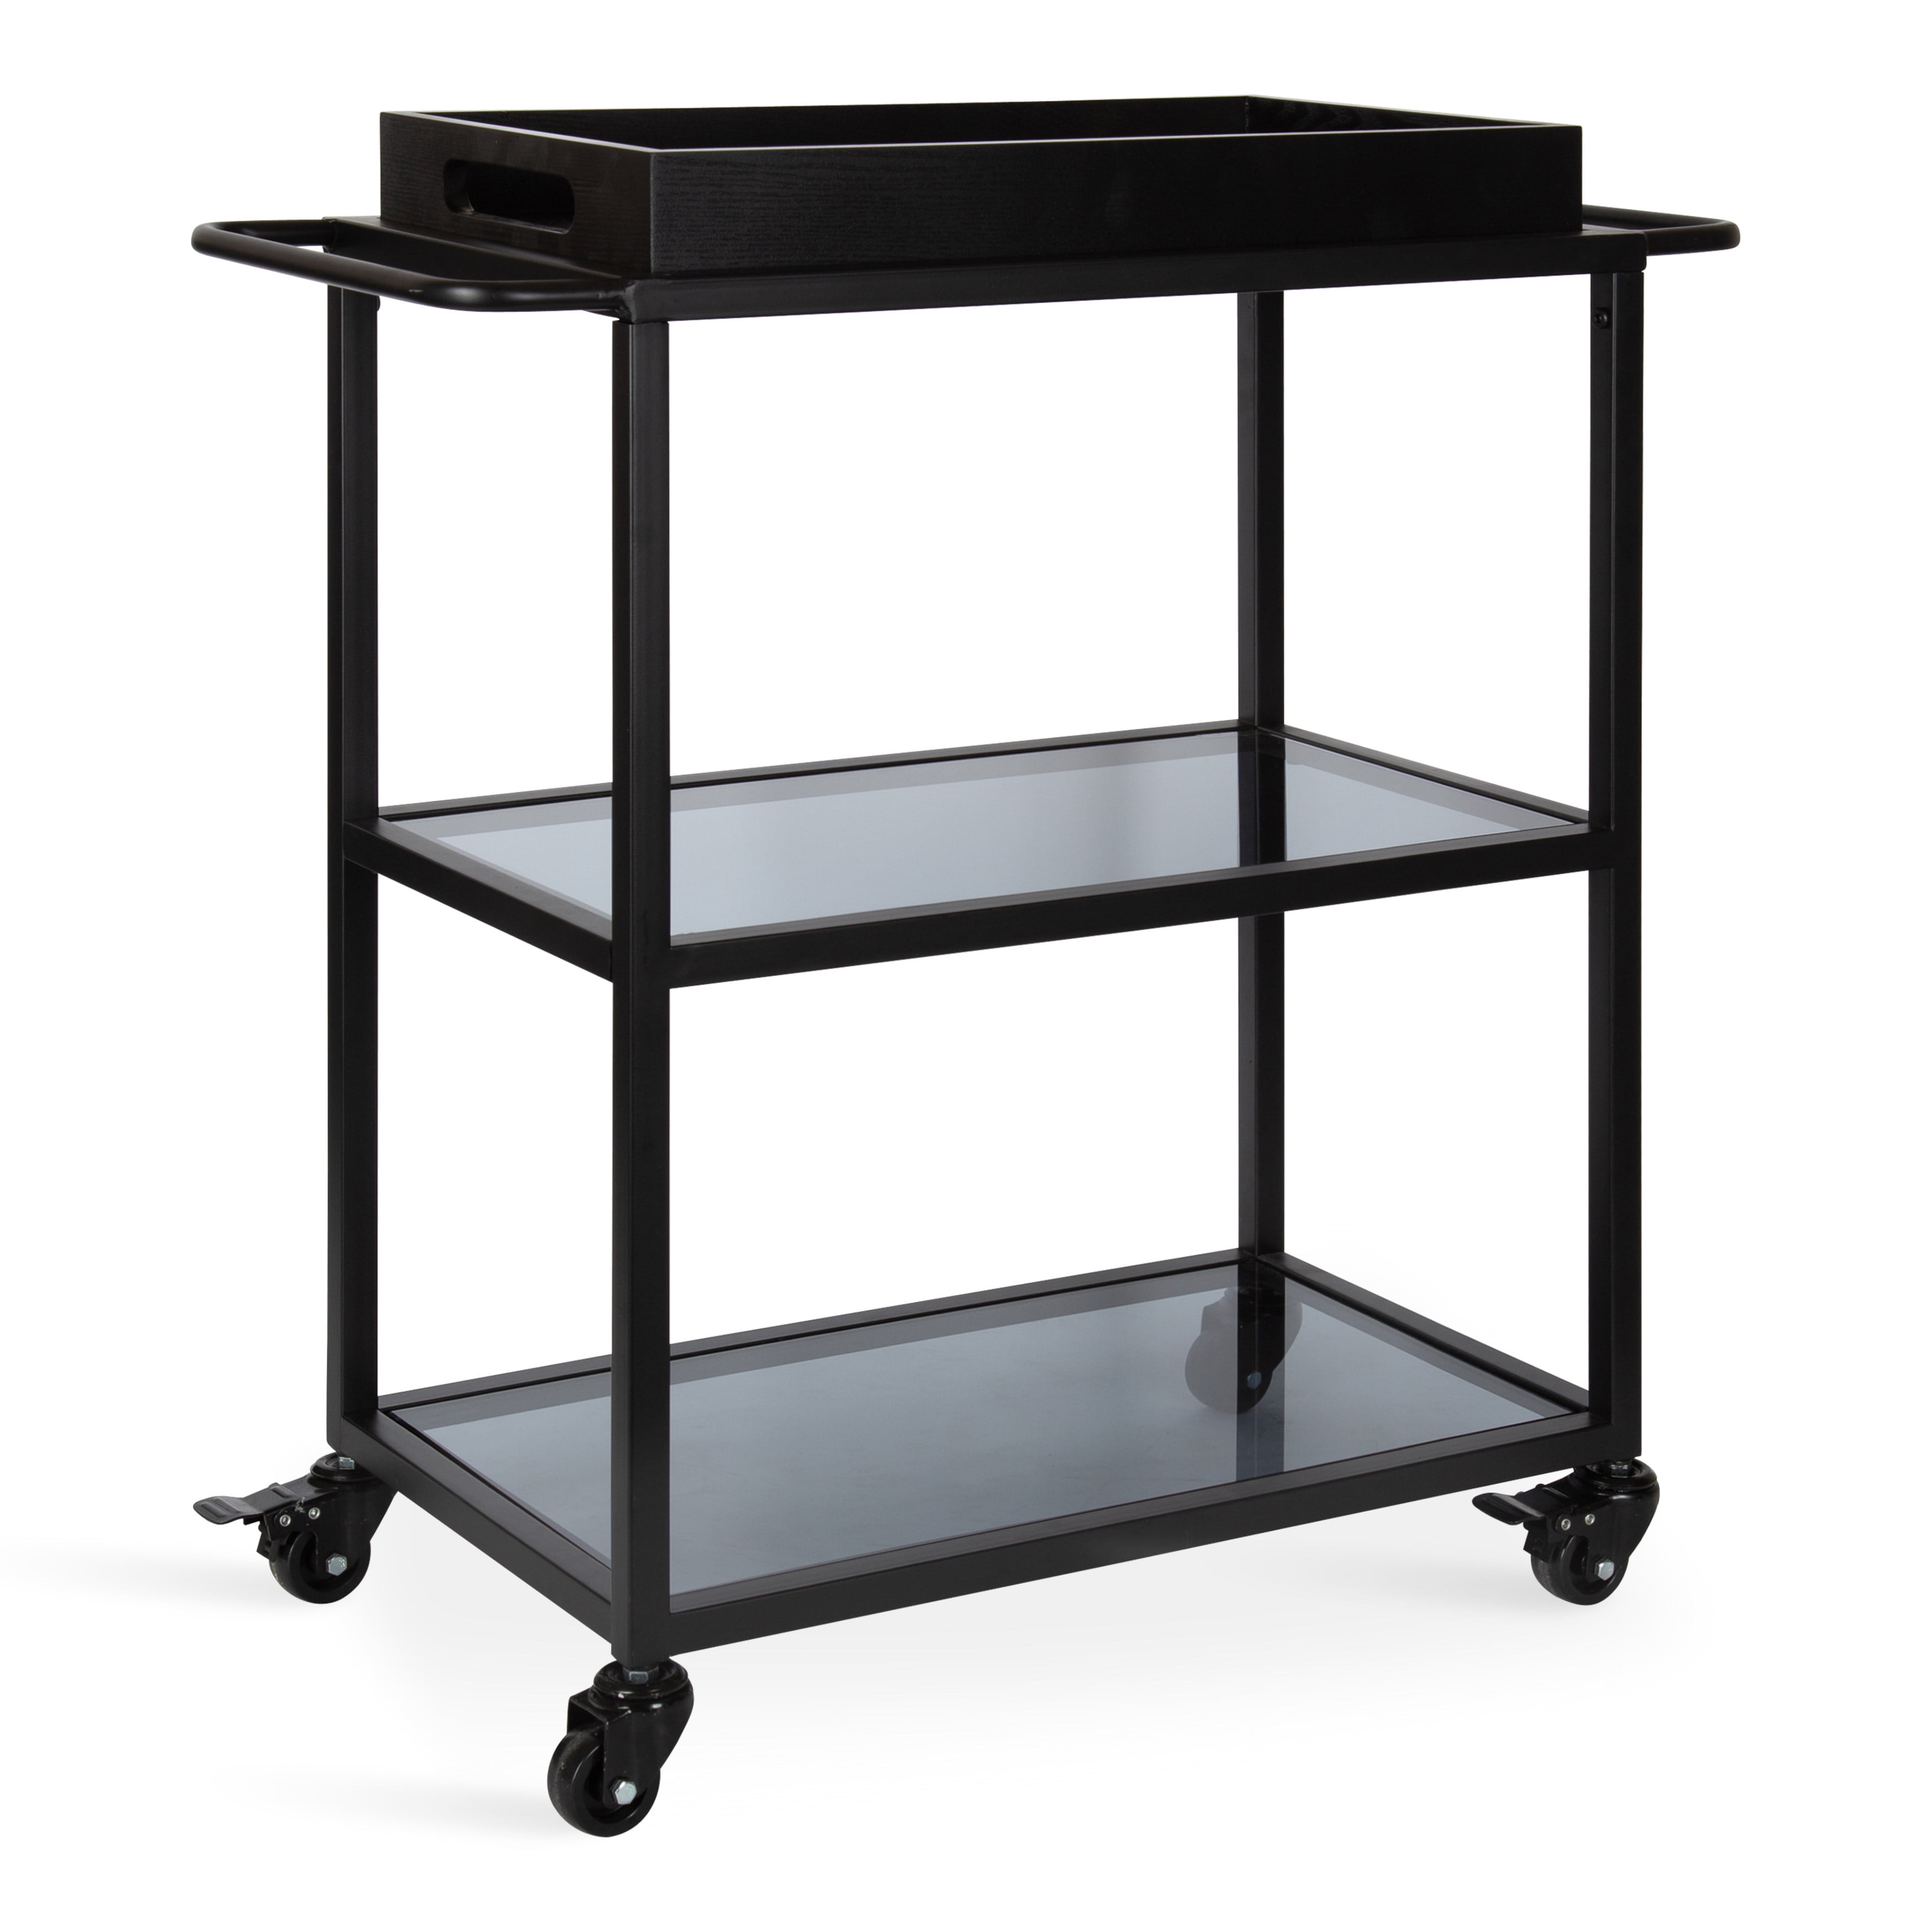 Kate and Laurel Giles Modern Metal Bar Cart with Removable Wood 28 x 13 x 30, Black, Chic Serving for Storage, Serving, and Display - Walmart.com